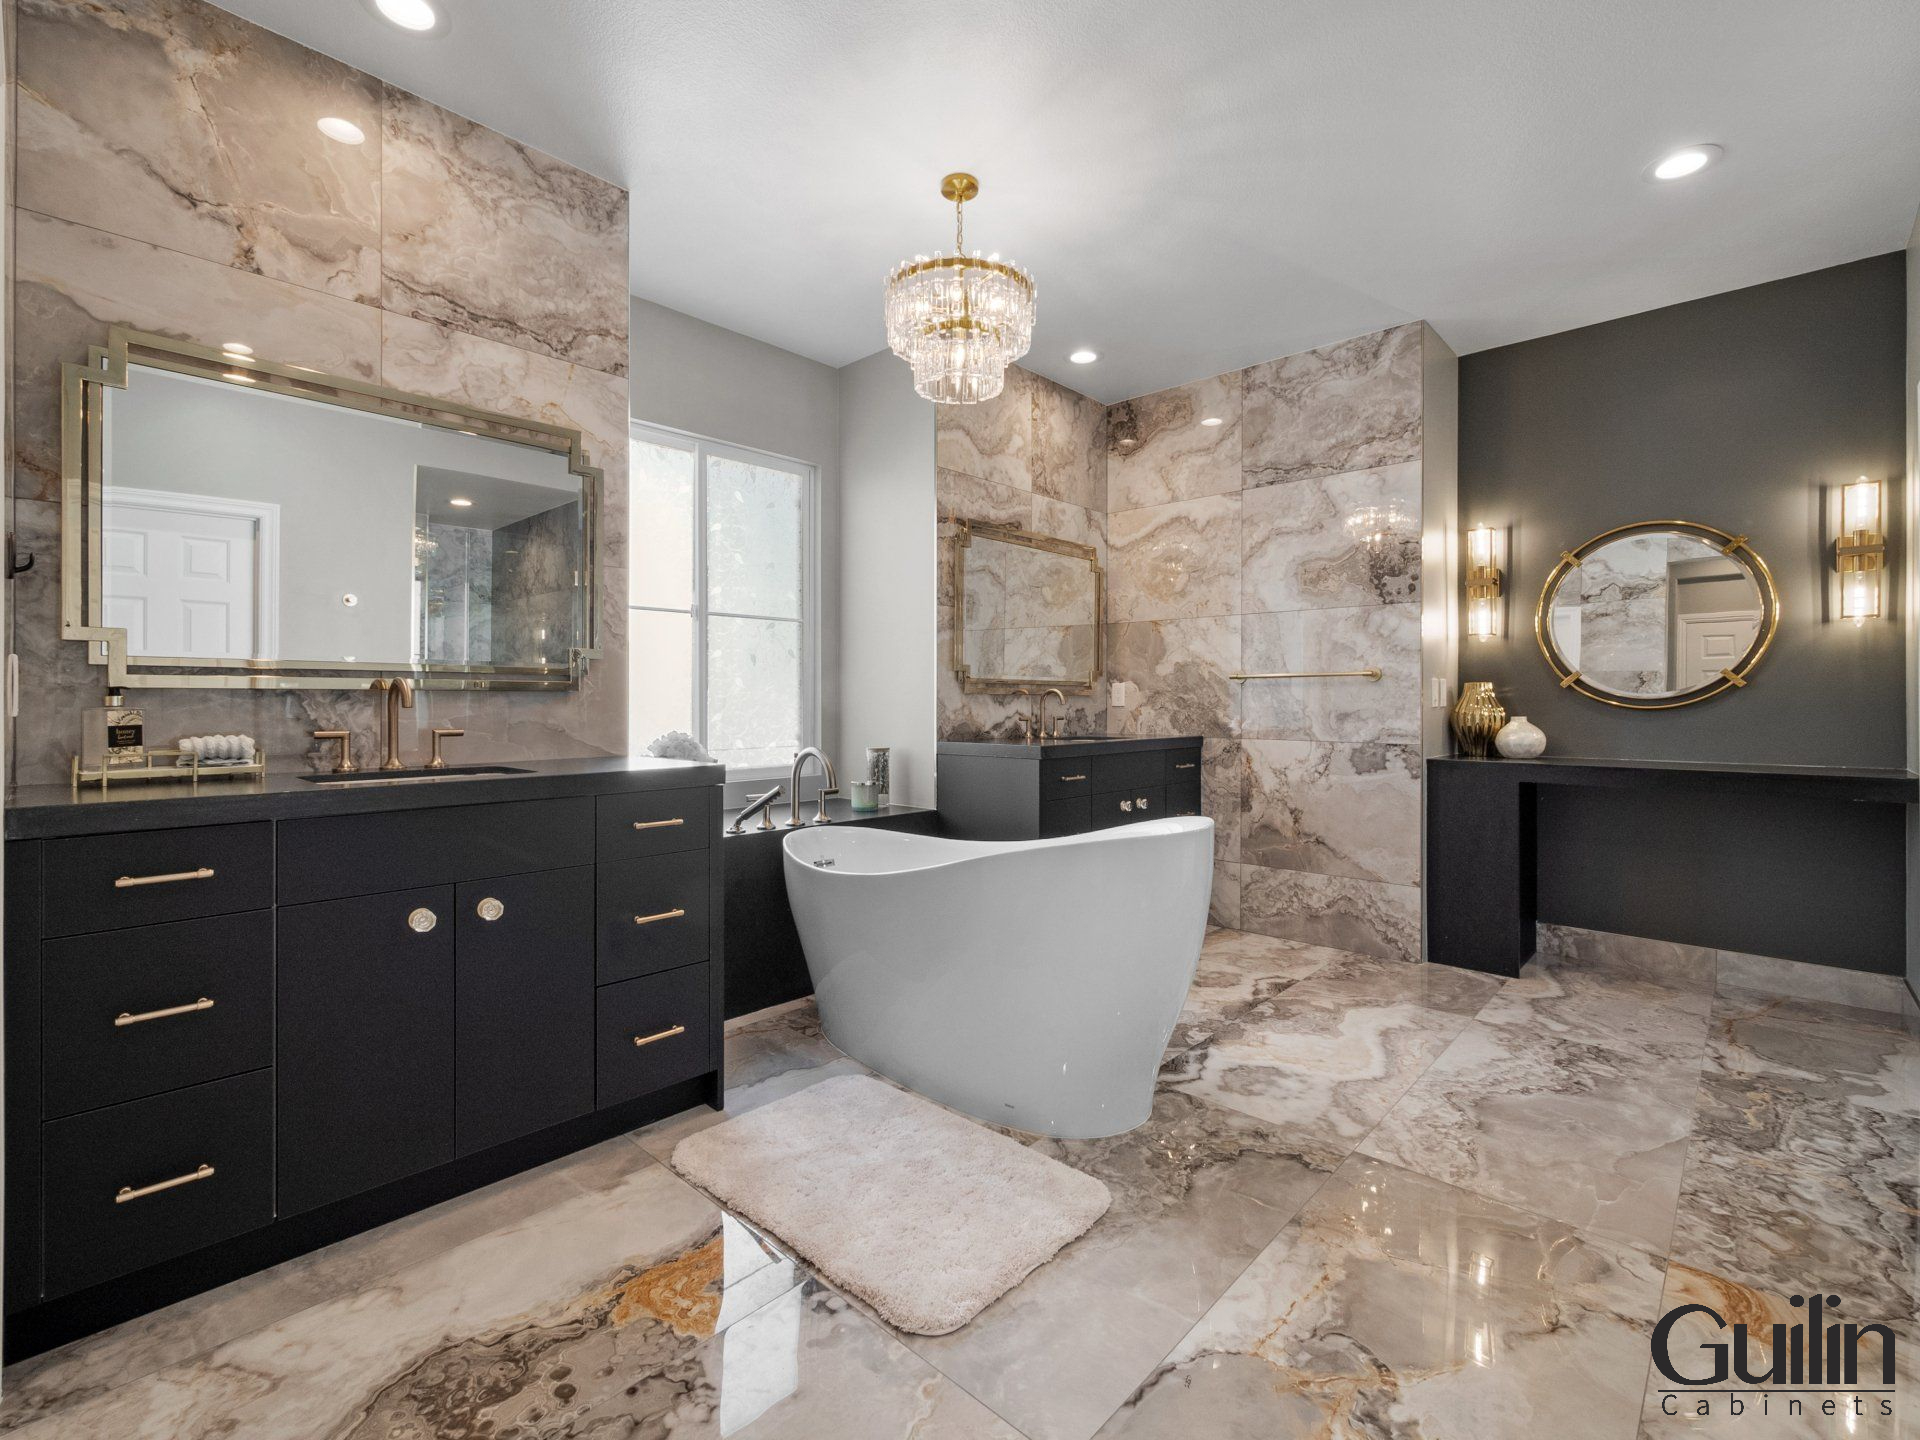 if you want to make your small bathroom look bigger and more inviting, go for lighter tones.